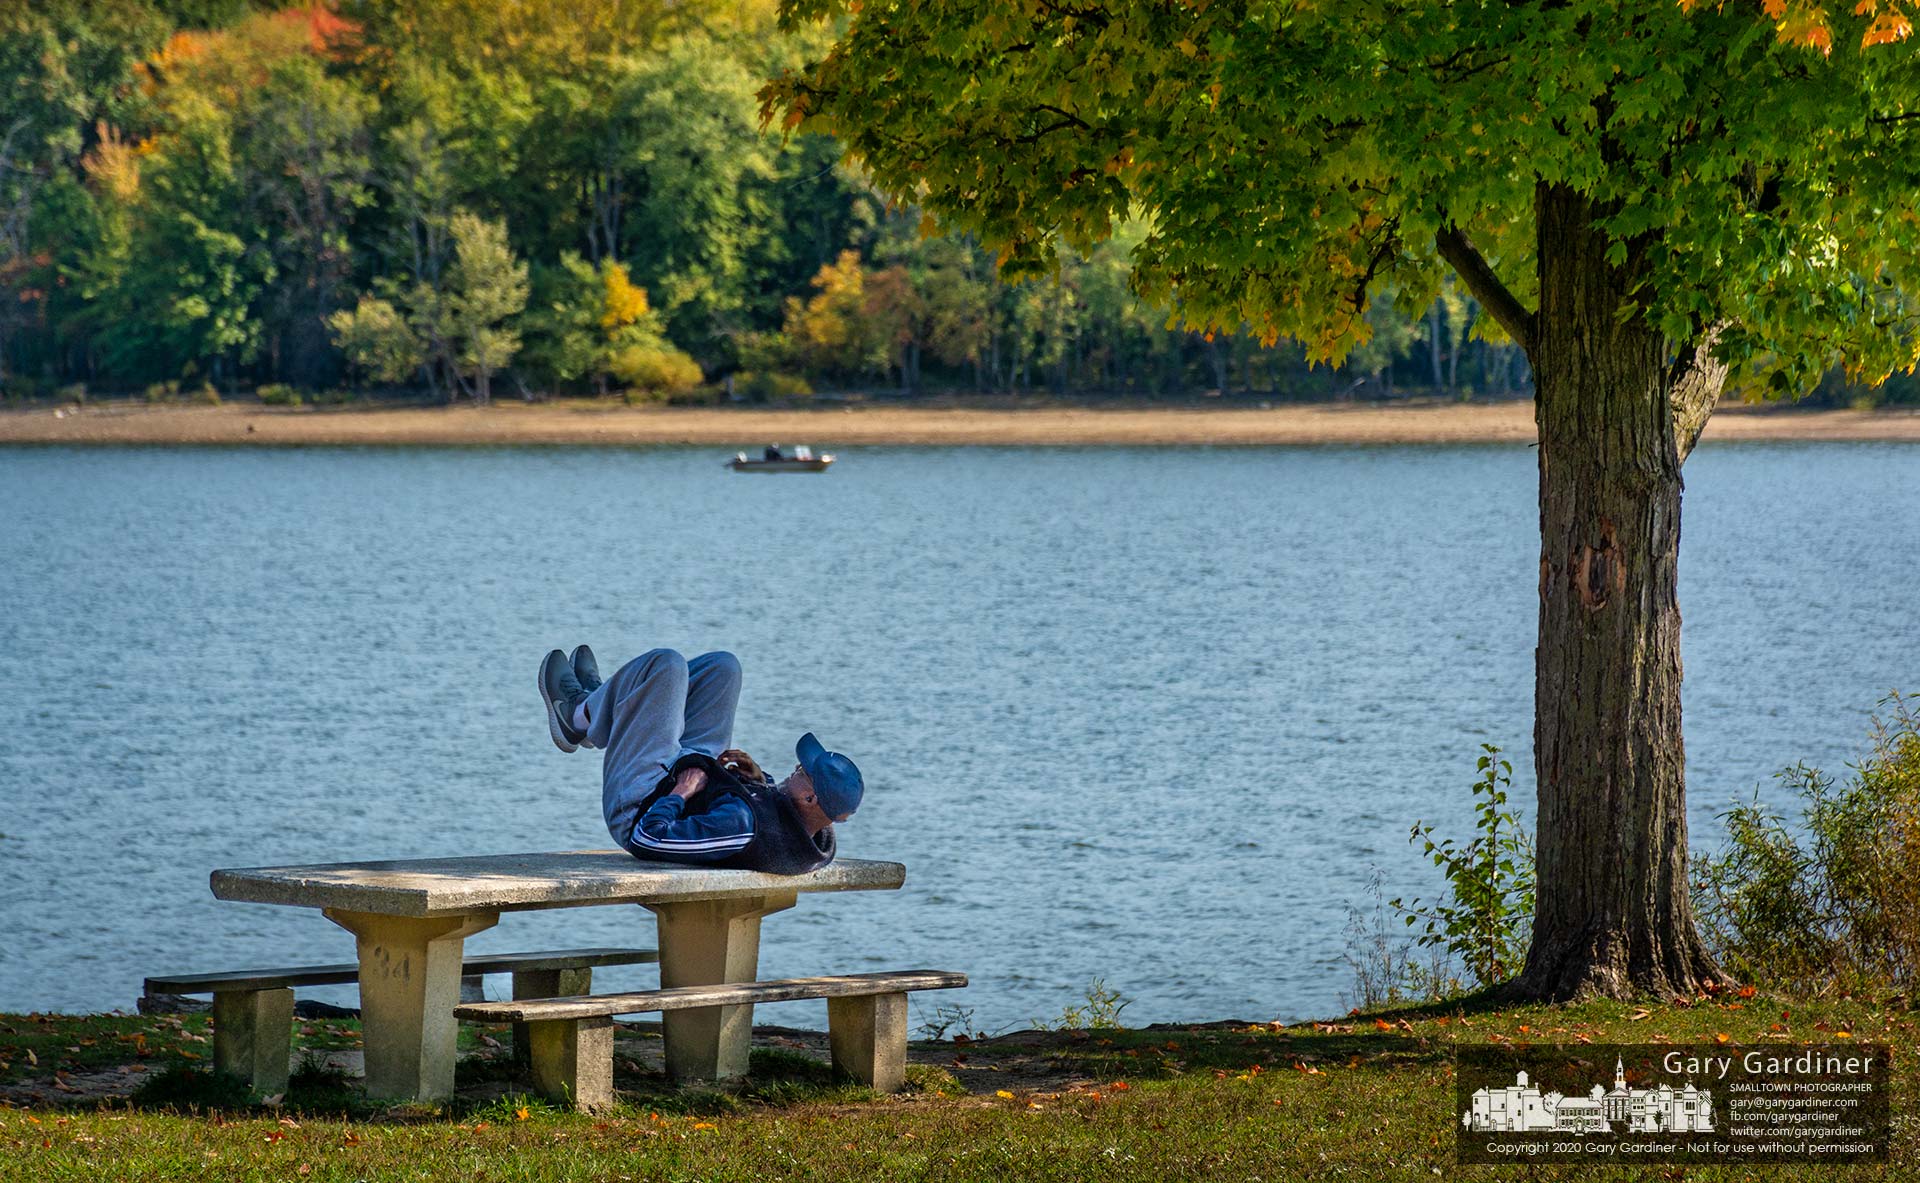 A noontime visitor at Red Bank Park on Hoover Reservoir uses one of the picnic tables to get in a round of leg lifts as part of his exercise routine. My Final Photo for Oct. 9, 2020.